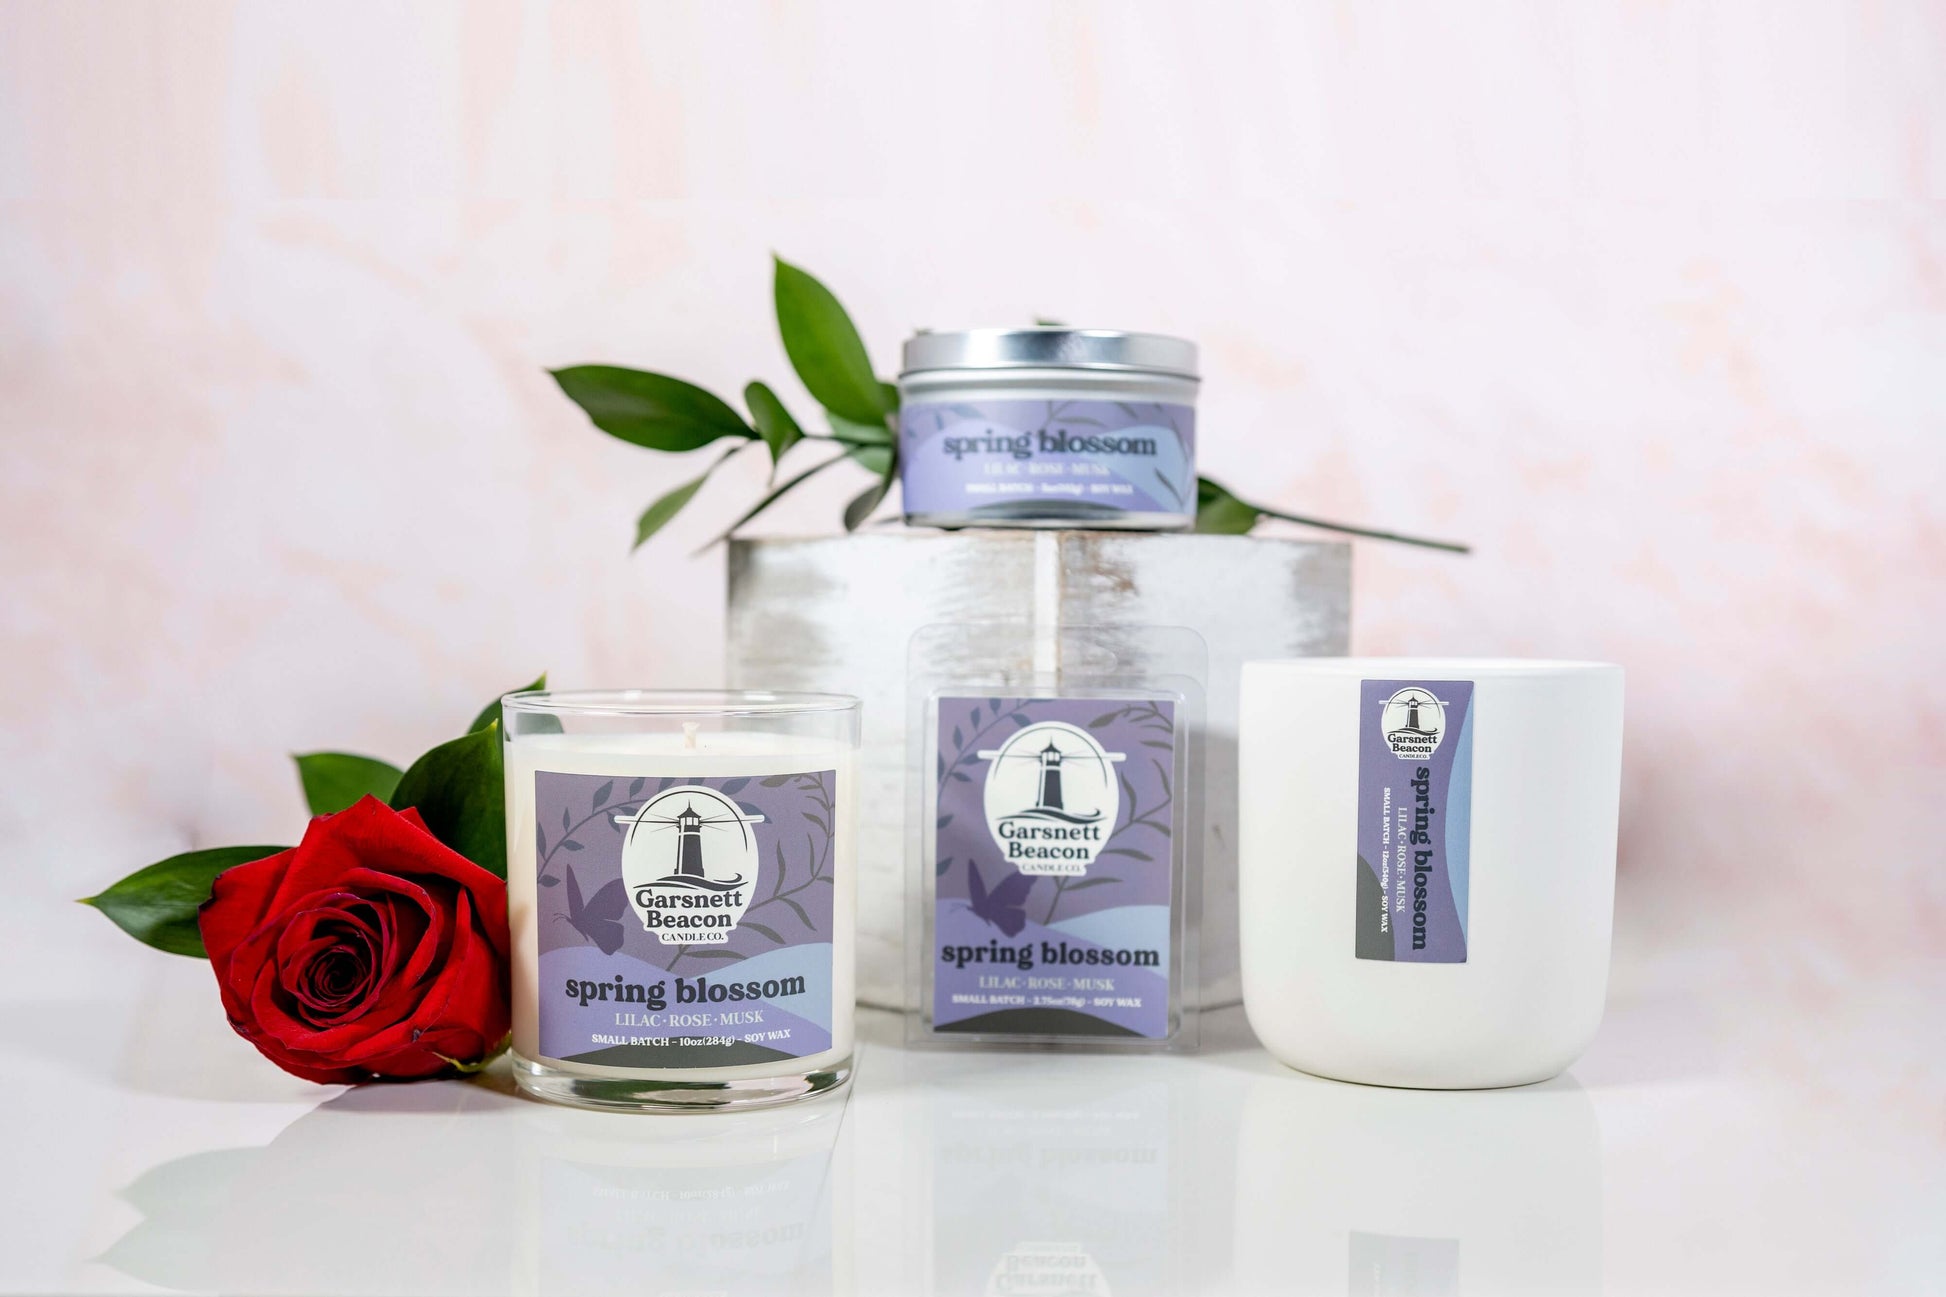 Lilac Rose Lilies Light Musk scented candles called Spring Blossom in glass ceramic tin and wax melts